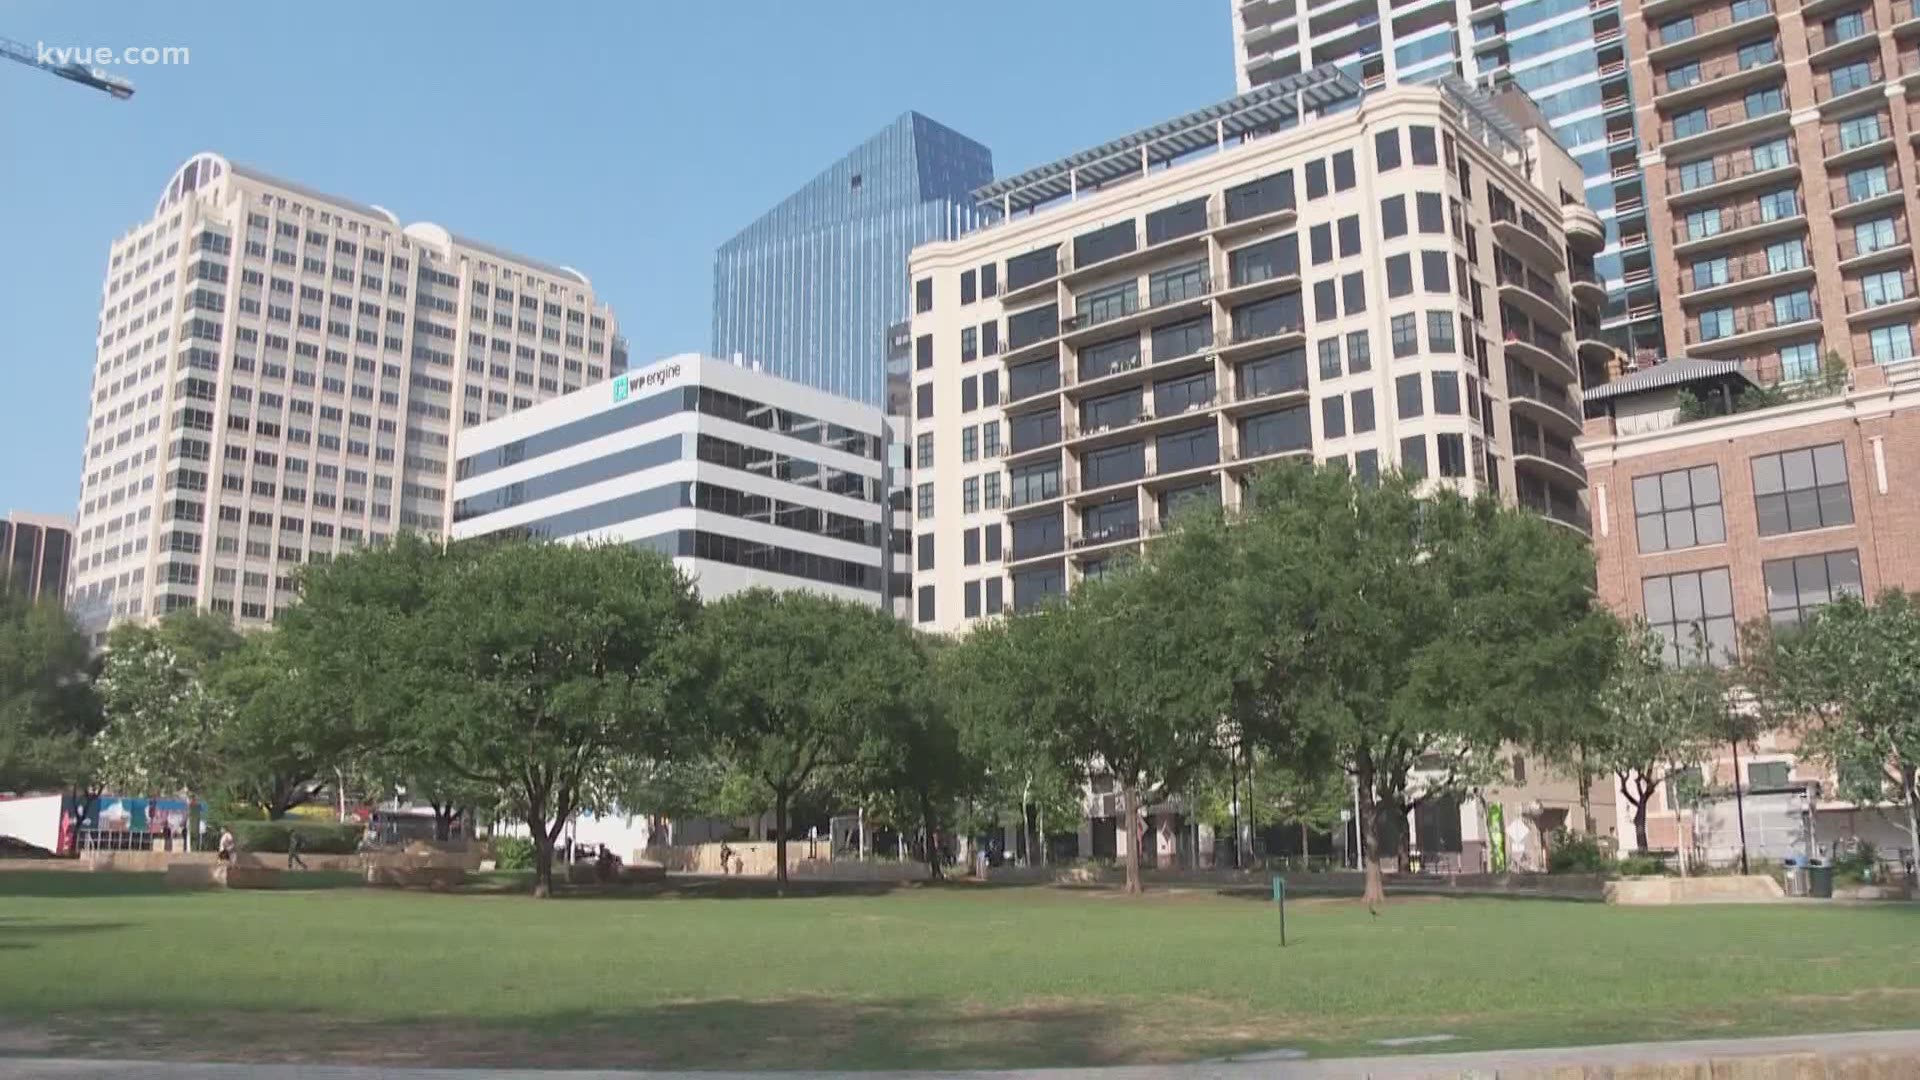 Austin's population growth poses challenge to the future of the City's